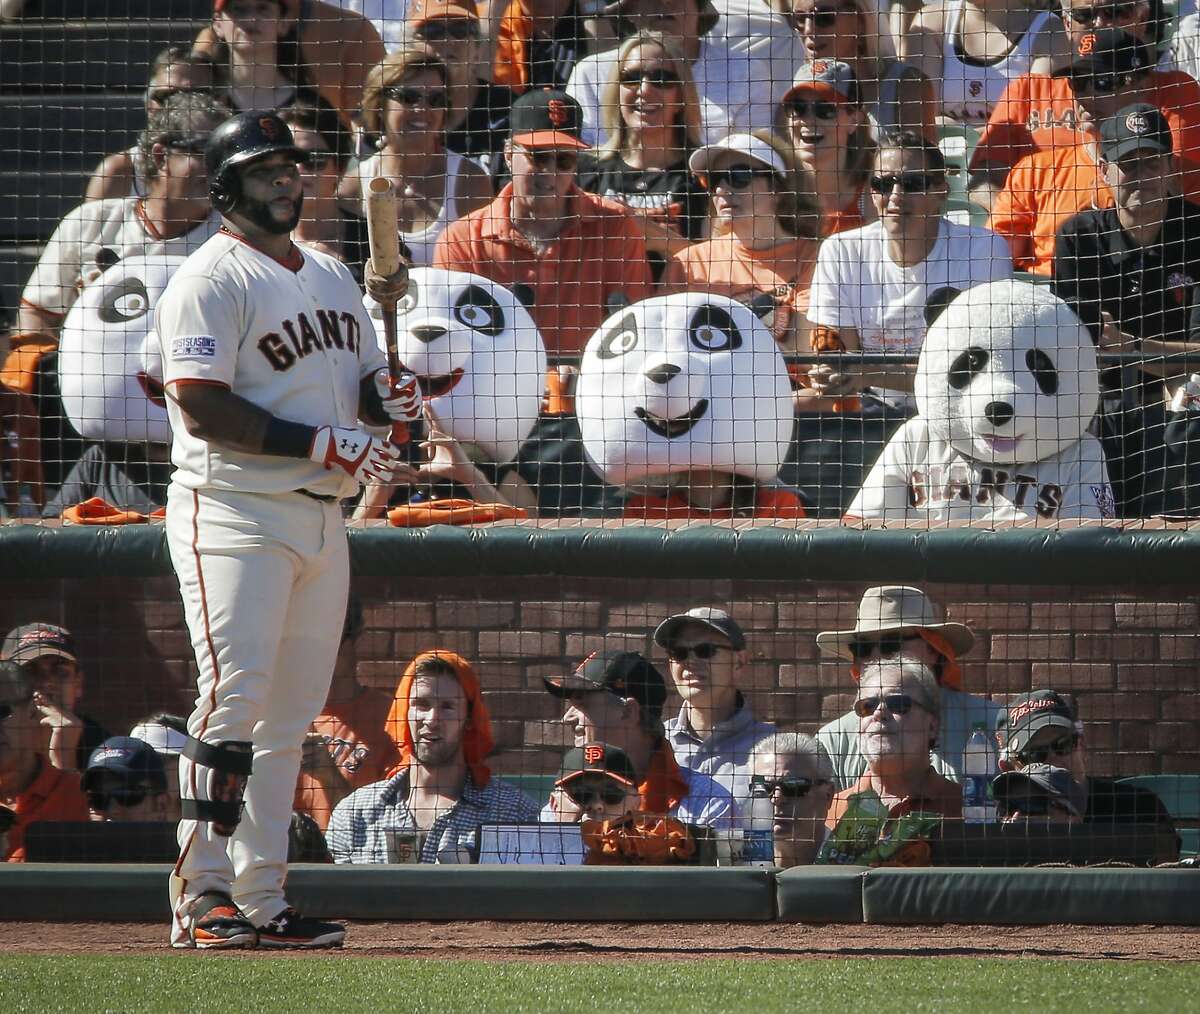 Giants Pablo Sandoval stands in the on deck circle during Game 3 of the NLDS at AT&T Park on Monday, Oct. 6, 2014 in San Francisco, Calif.